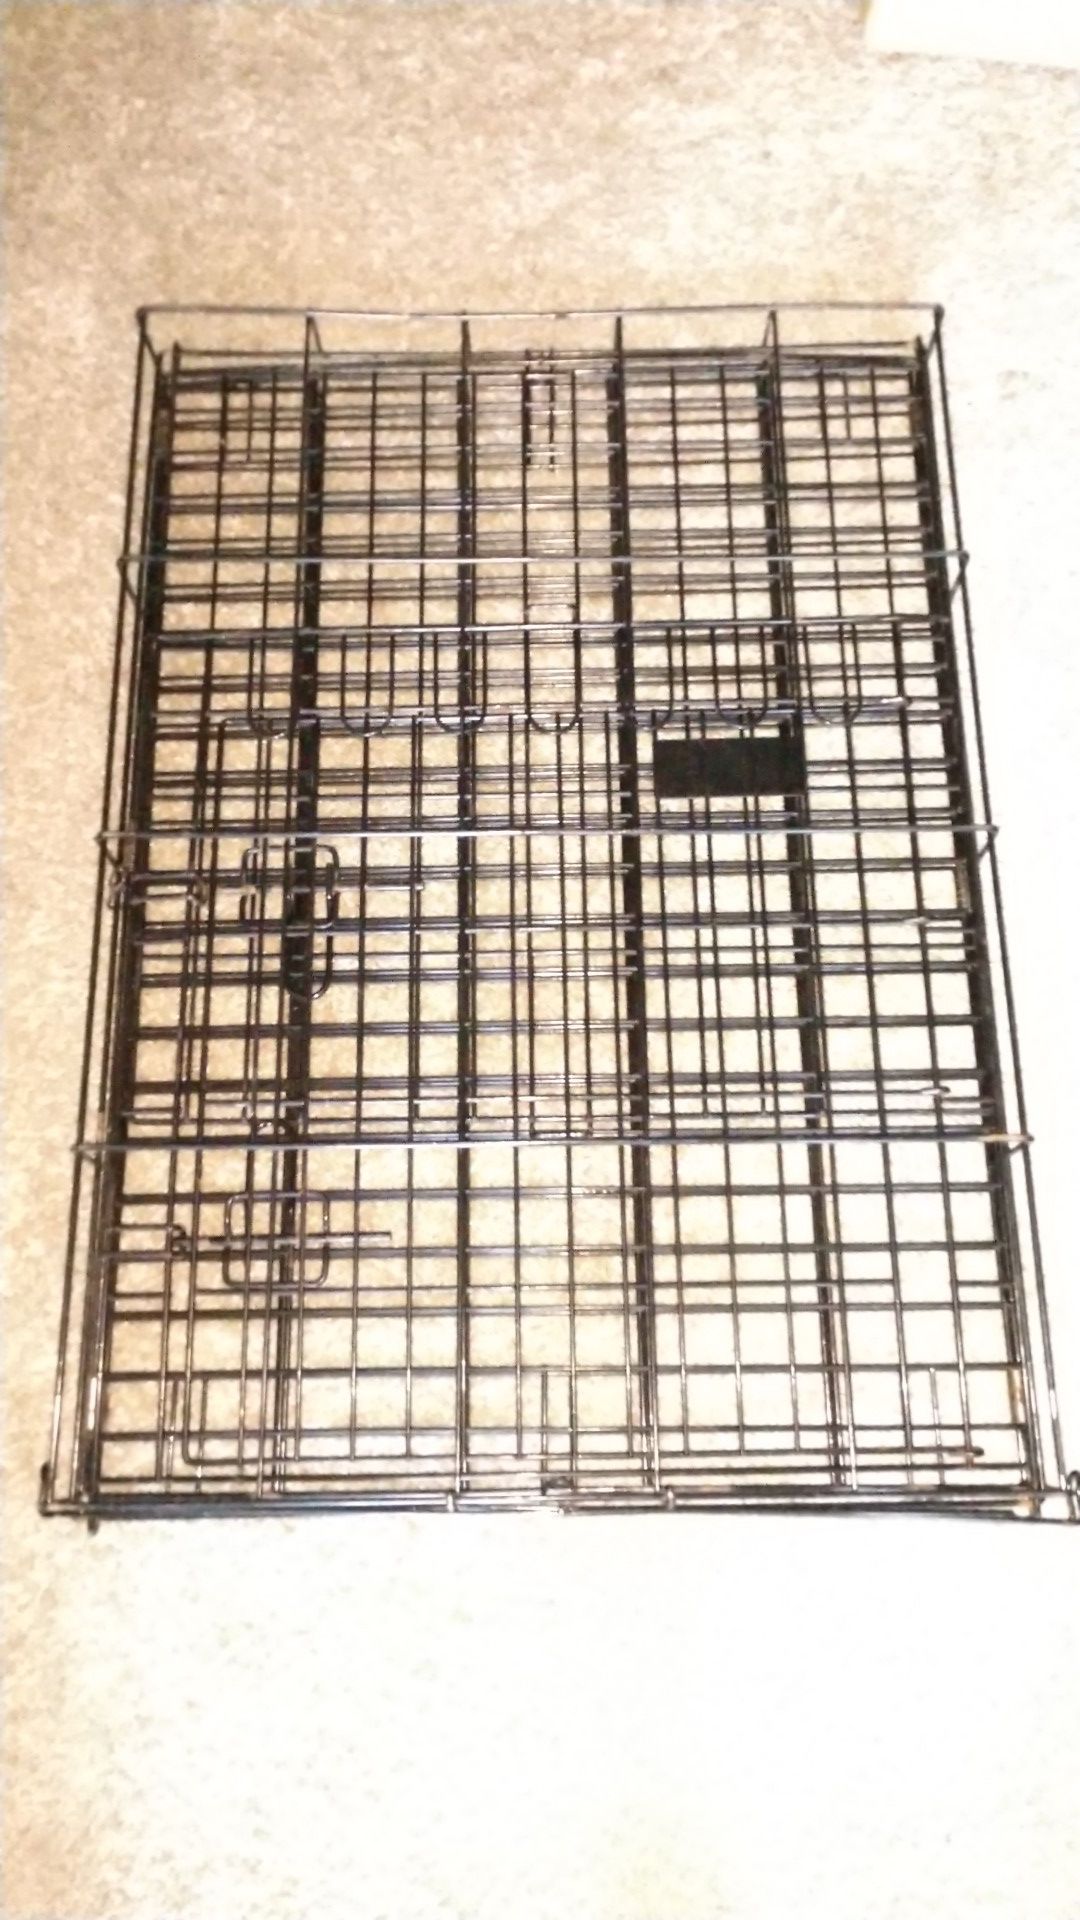 Easy to store, fully colapsable pet crate